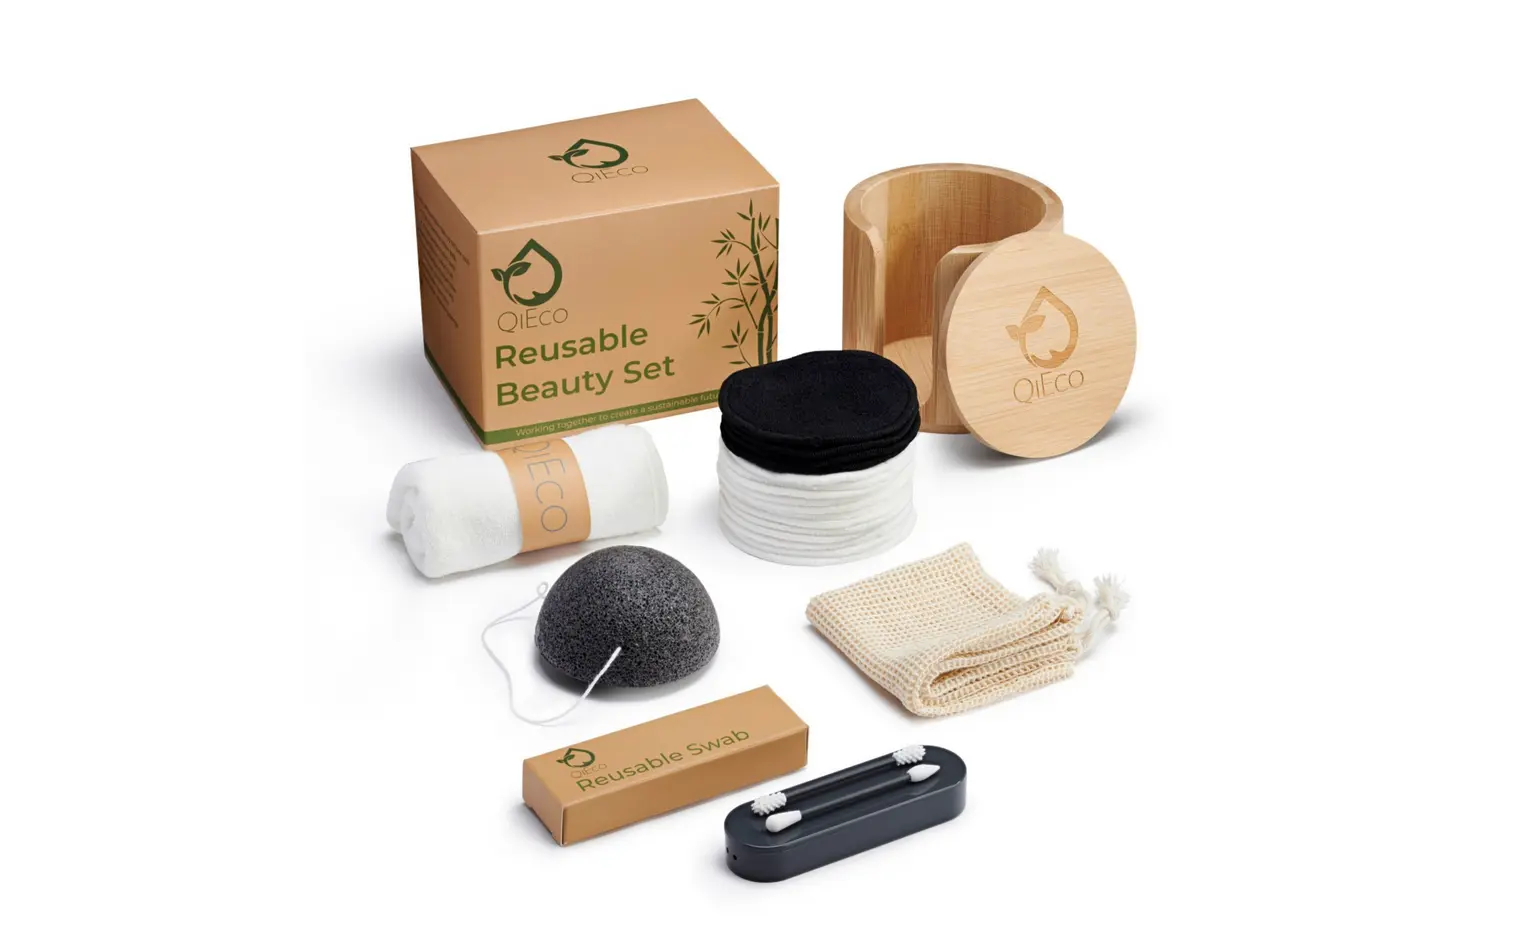 Durable, high-quality reusable products